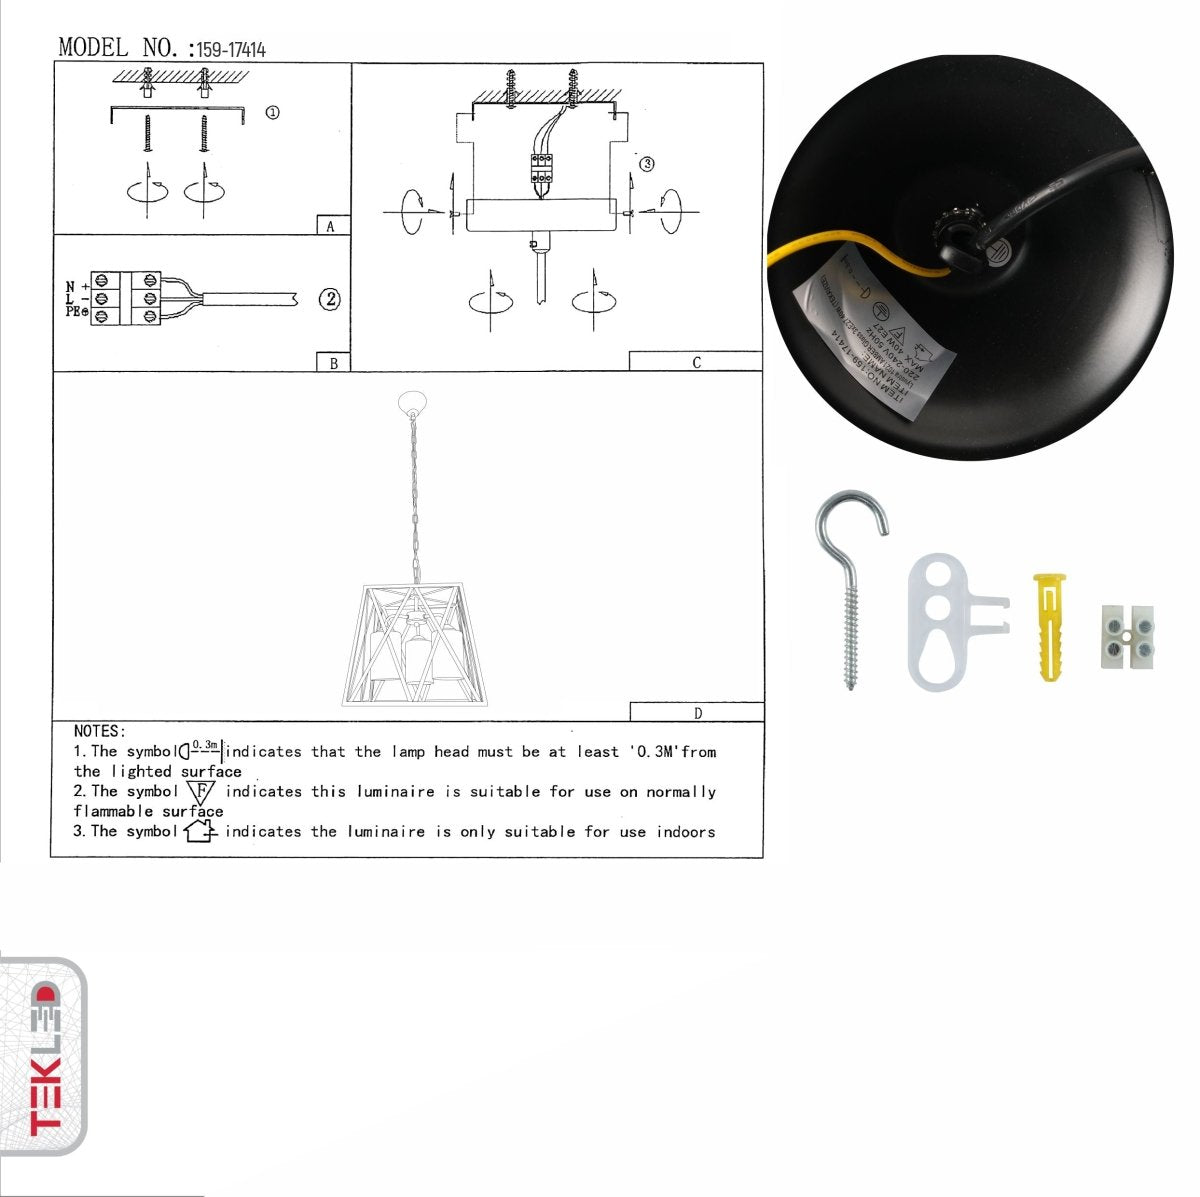 User manual for Black Metal Body Amber Cylinder Glass Cage Cuboid Chandelier with 3xE27 Fittings | TEKLED 159-17414